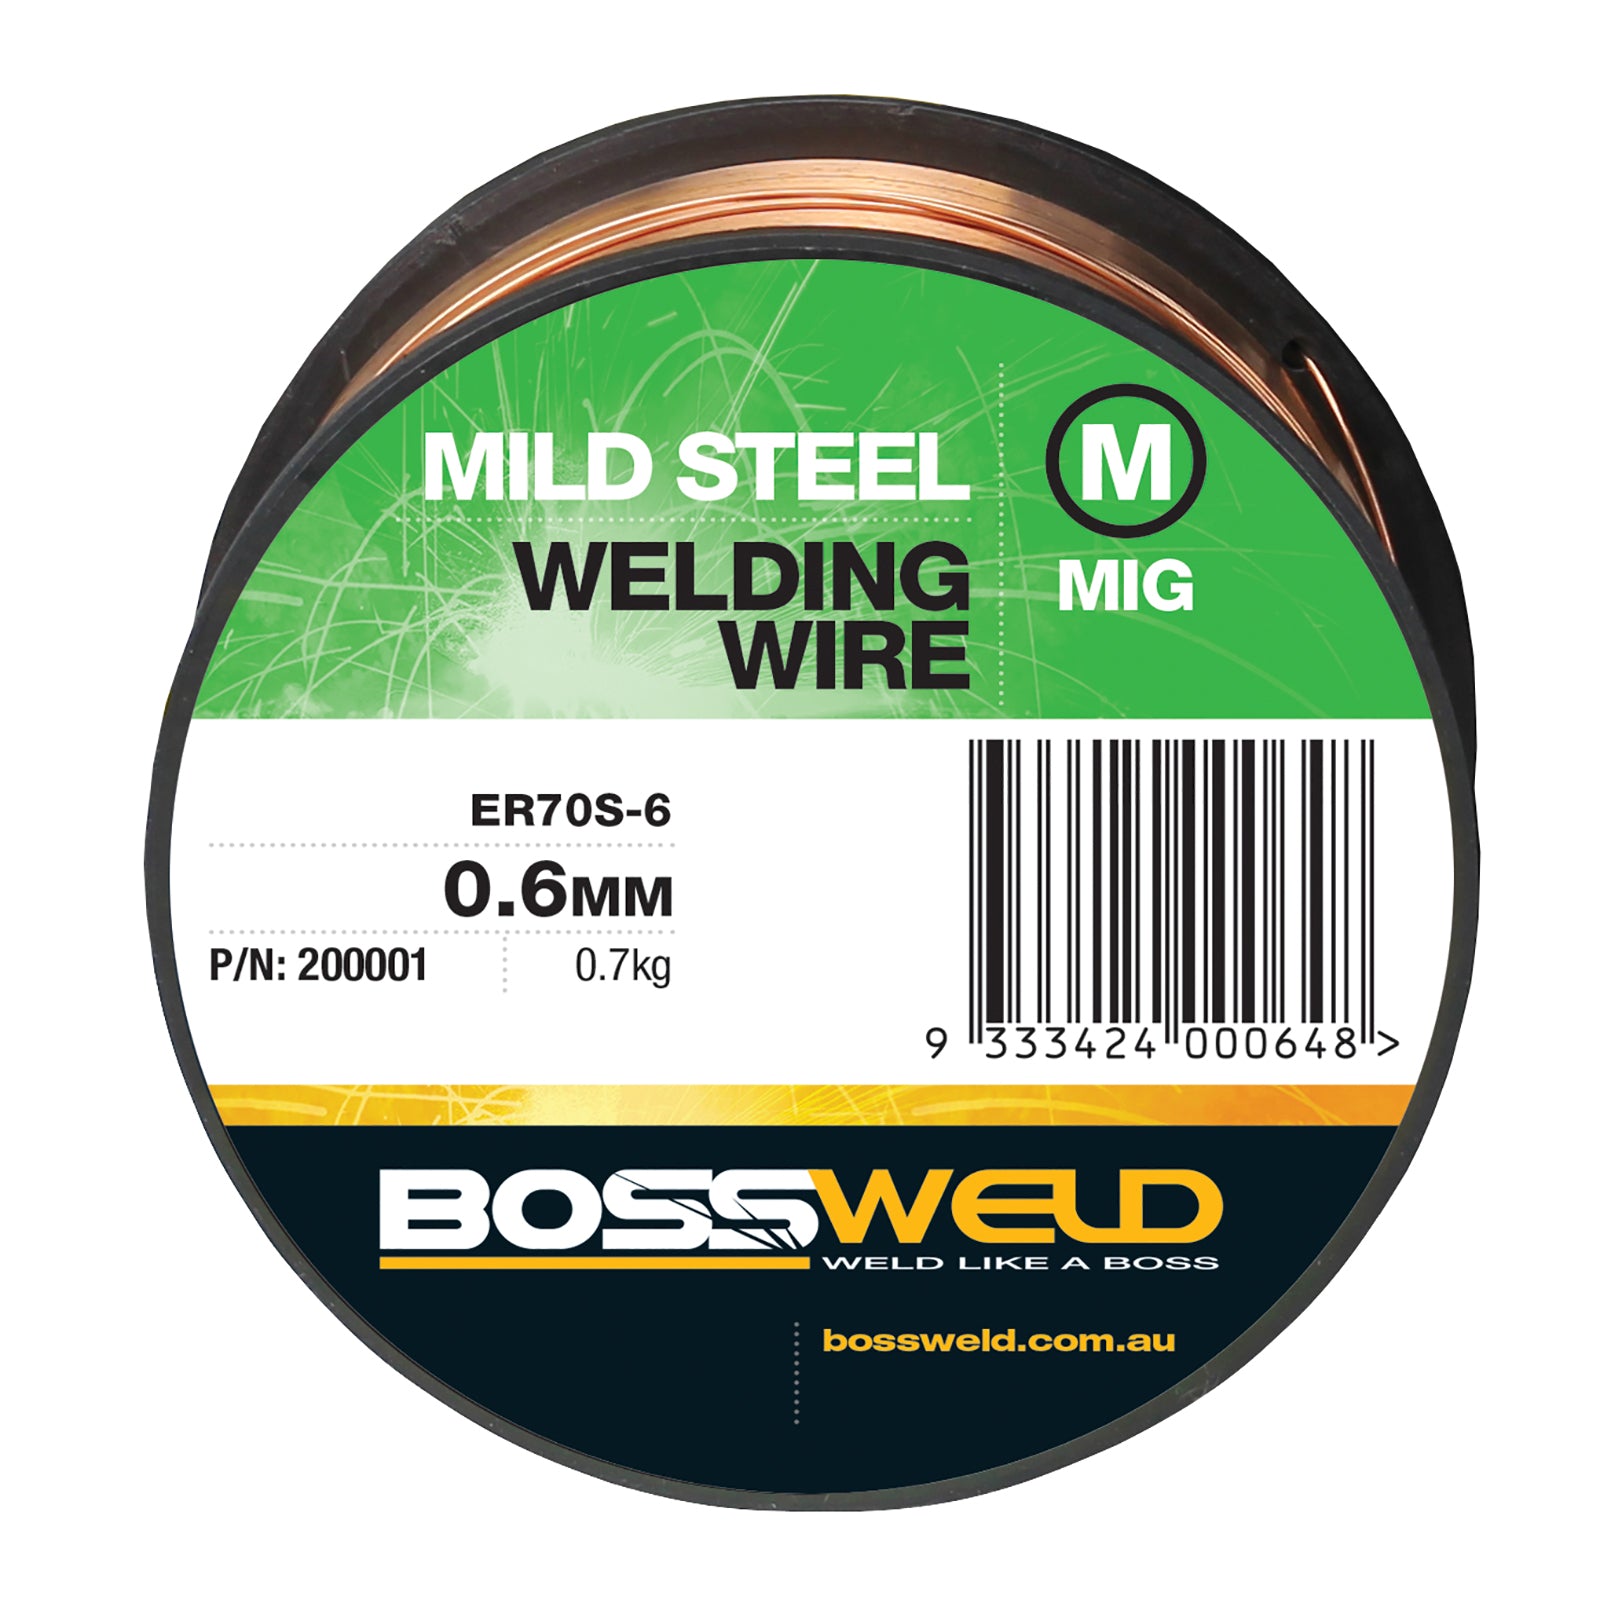 Bossweld Mig Wire - 0.6mm x 0.7kg